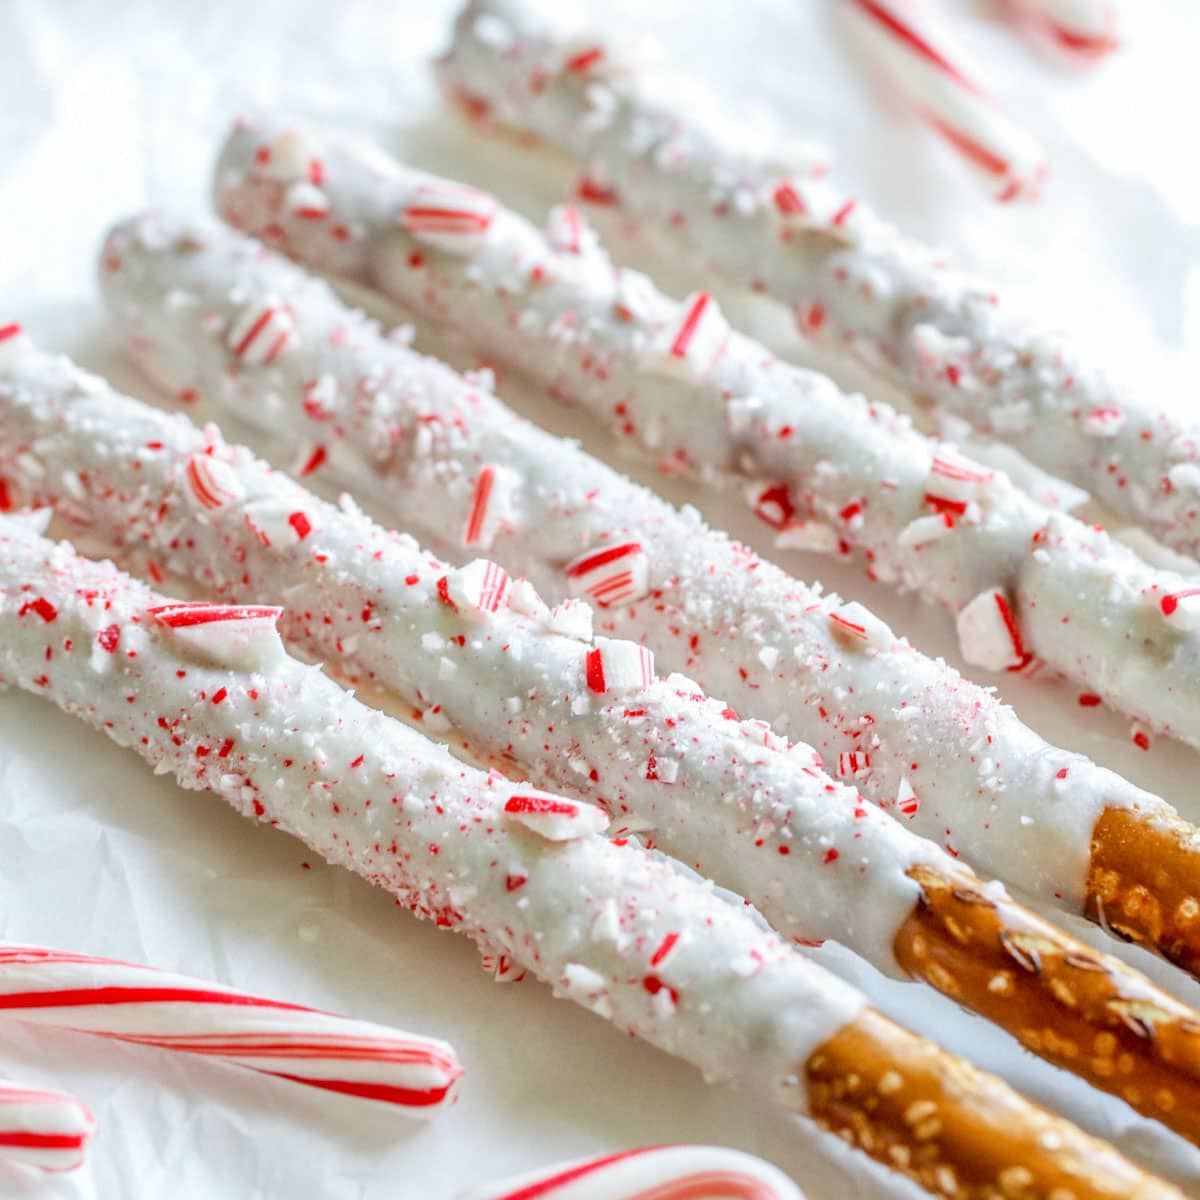 Candy cane coated white chocolate peppermint pretzel rods on was paper.